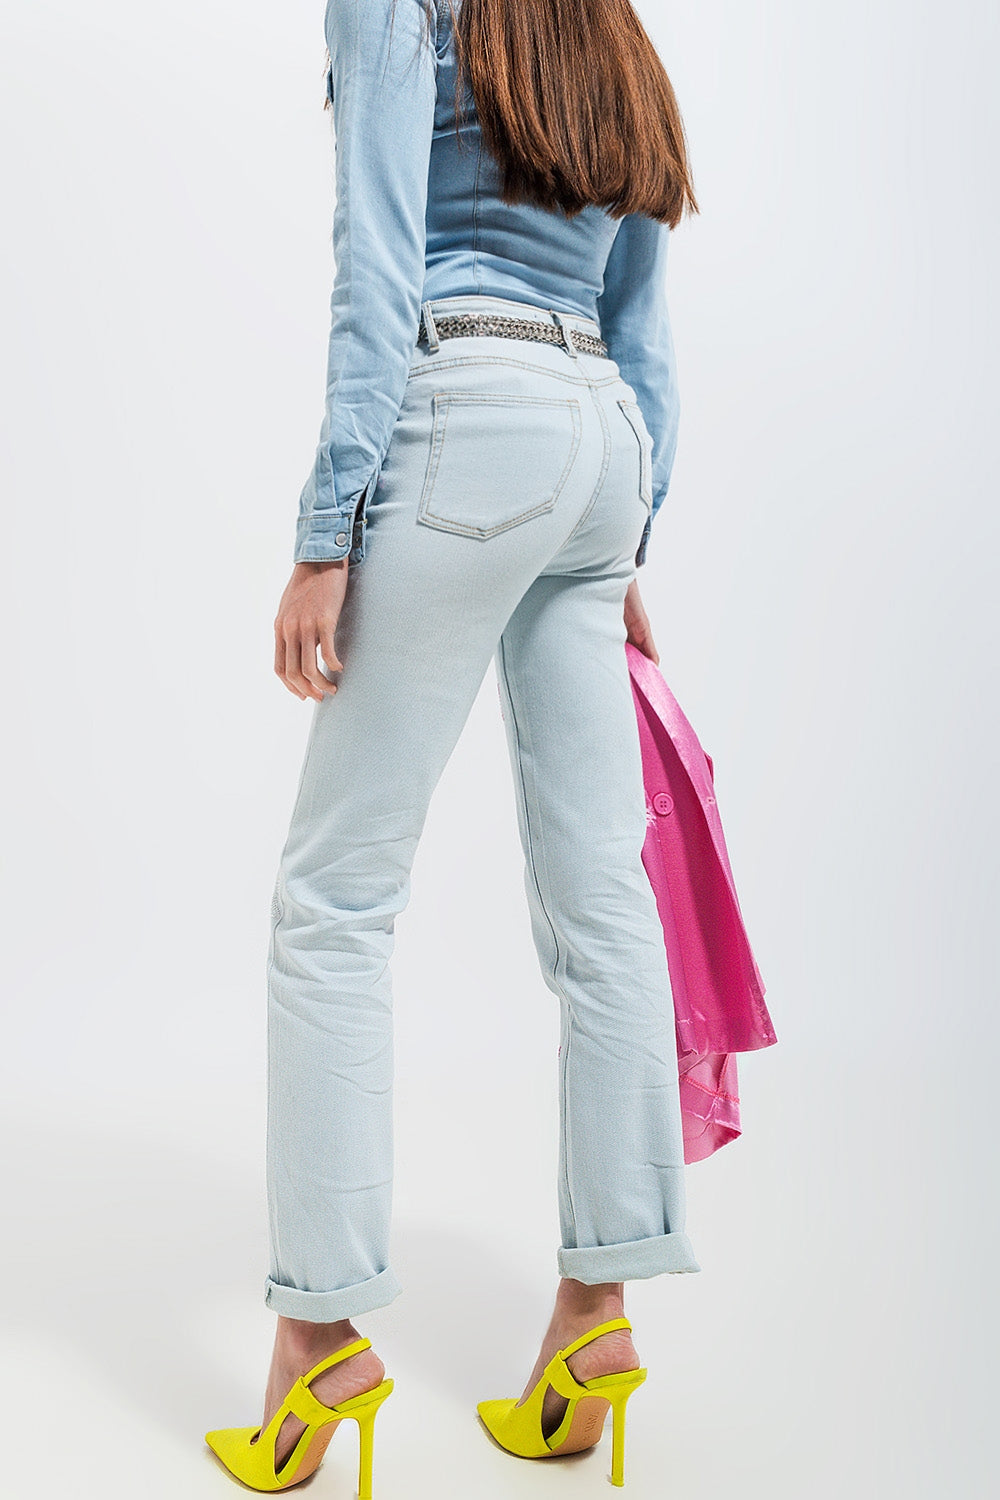 Straight Leg Jeans With Rhinestone Details